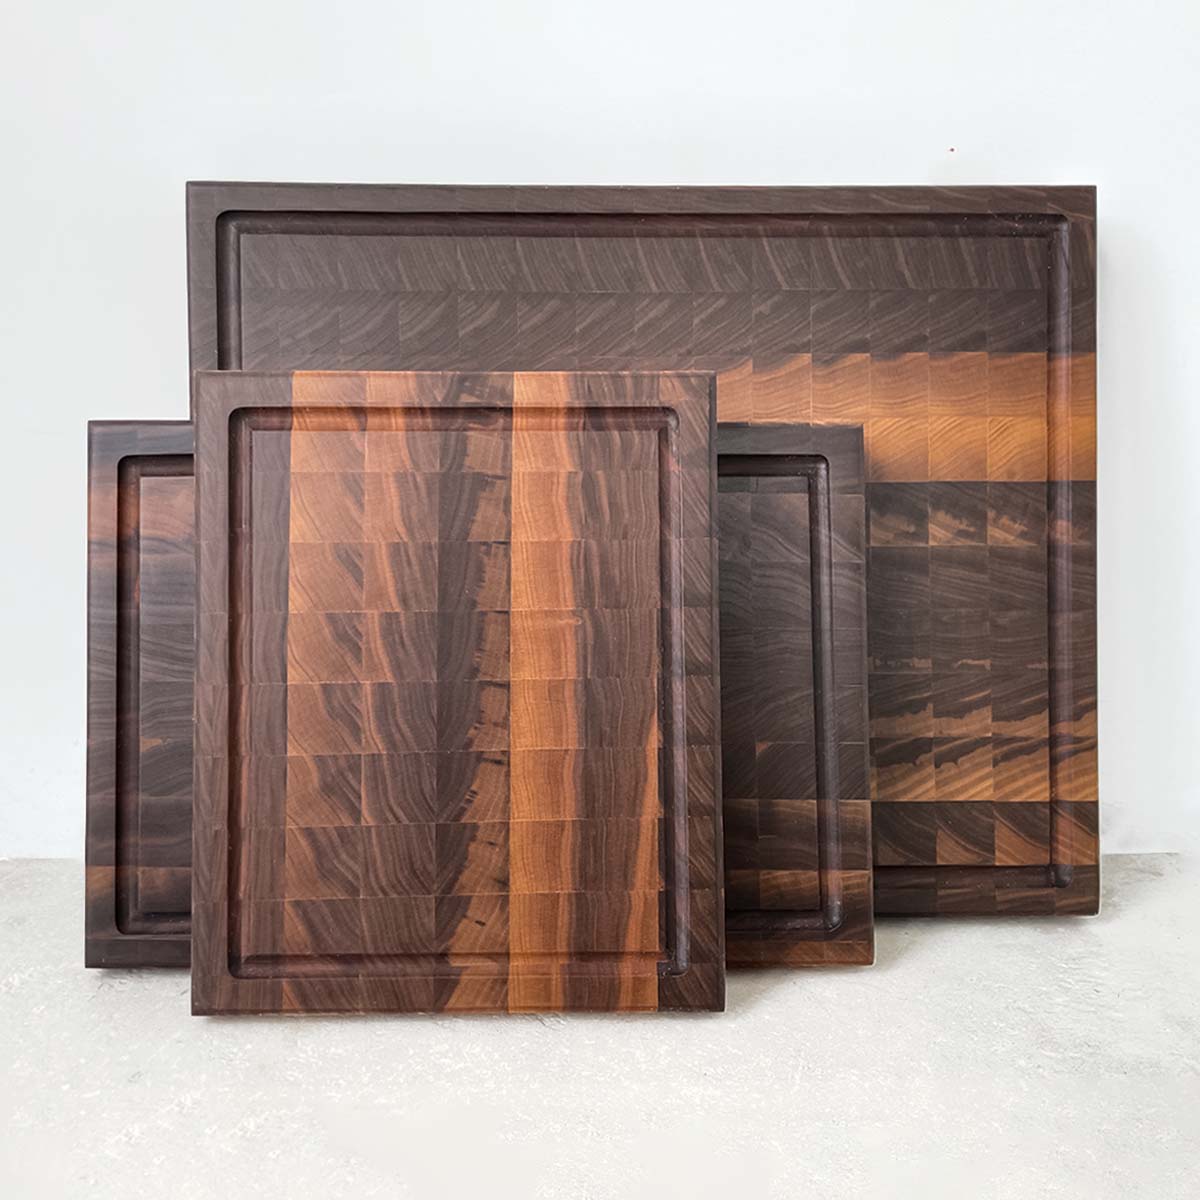 The Hawthorne set of 3 walnut end grain cutting boards is a best seller. The boards feature an arrowhead pattern providing an attractive and functional surface to cut and chop on. The end grain construction is gentle on knives and makes The Hawthorne a favourite among chefs. A staple kitchen accessory.